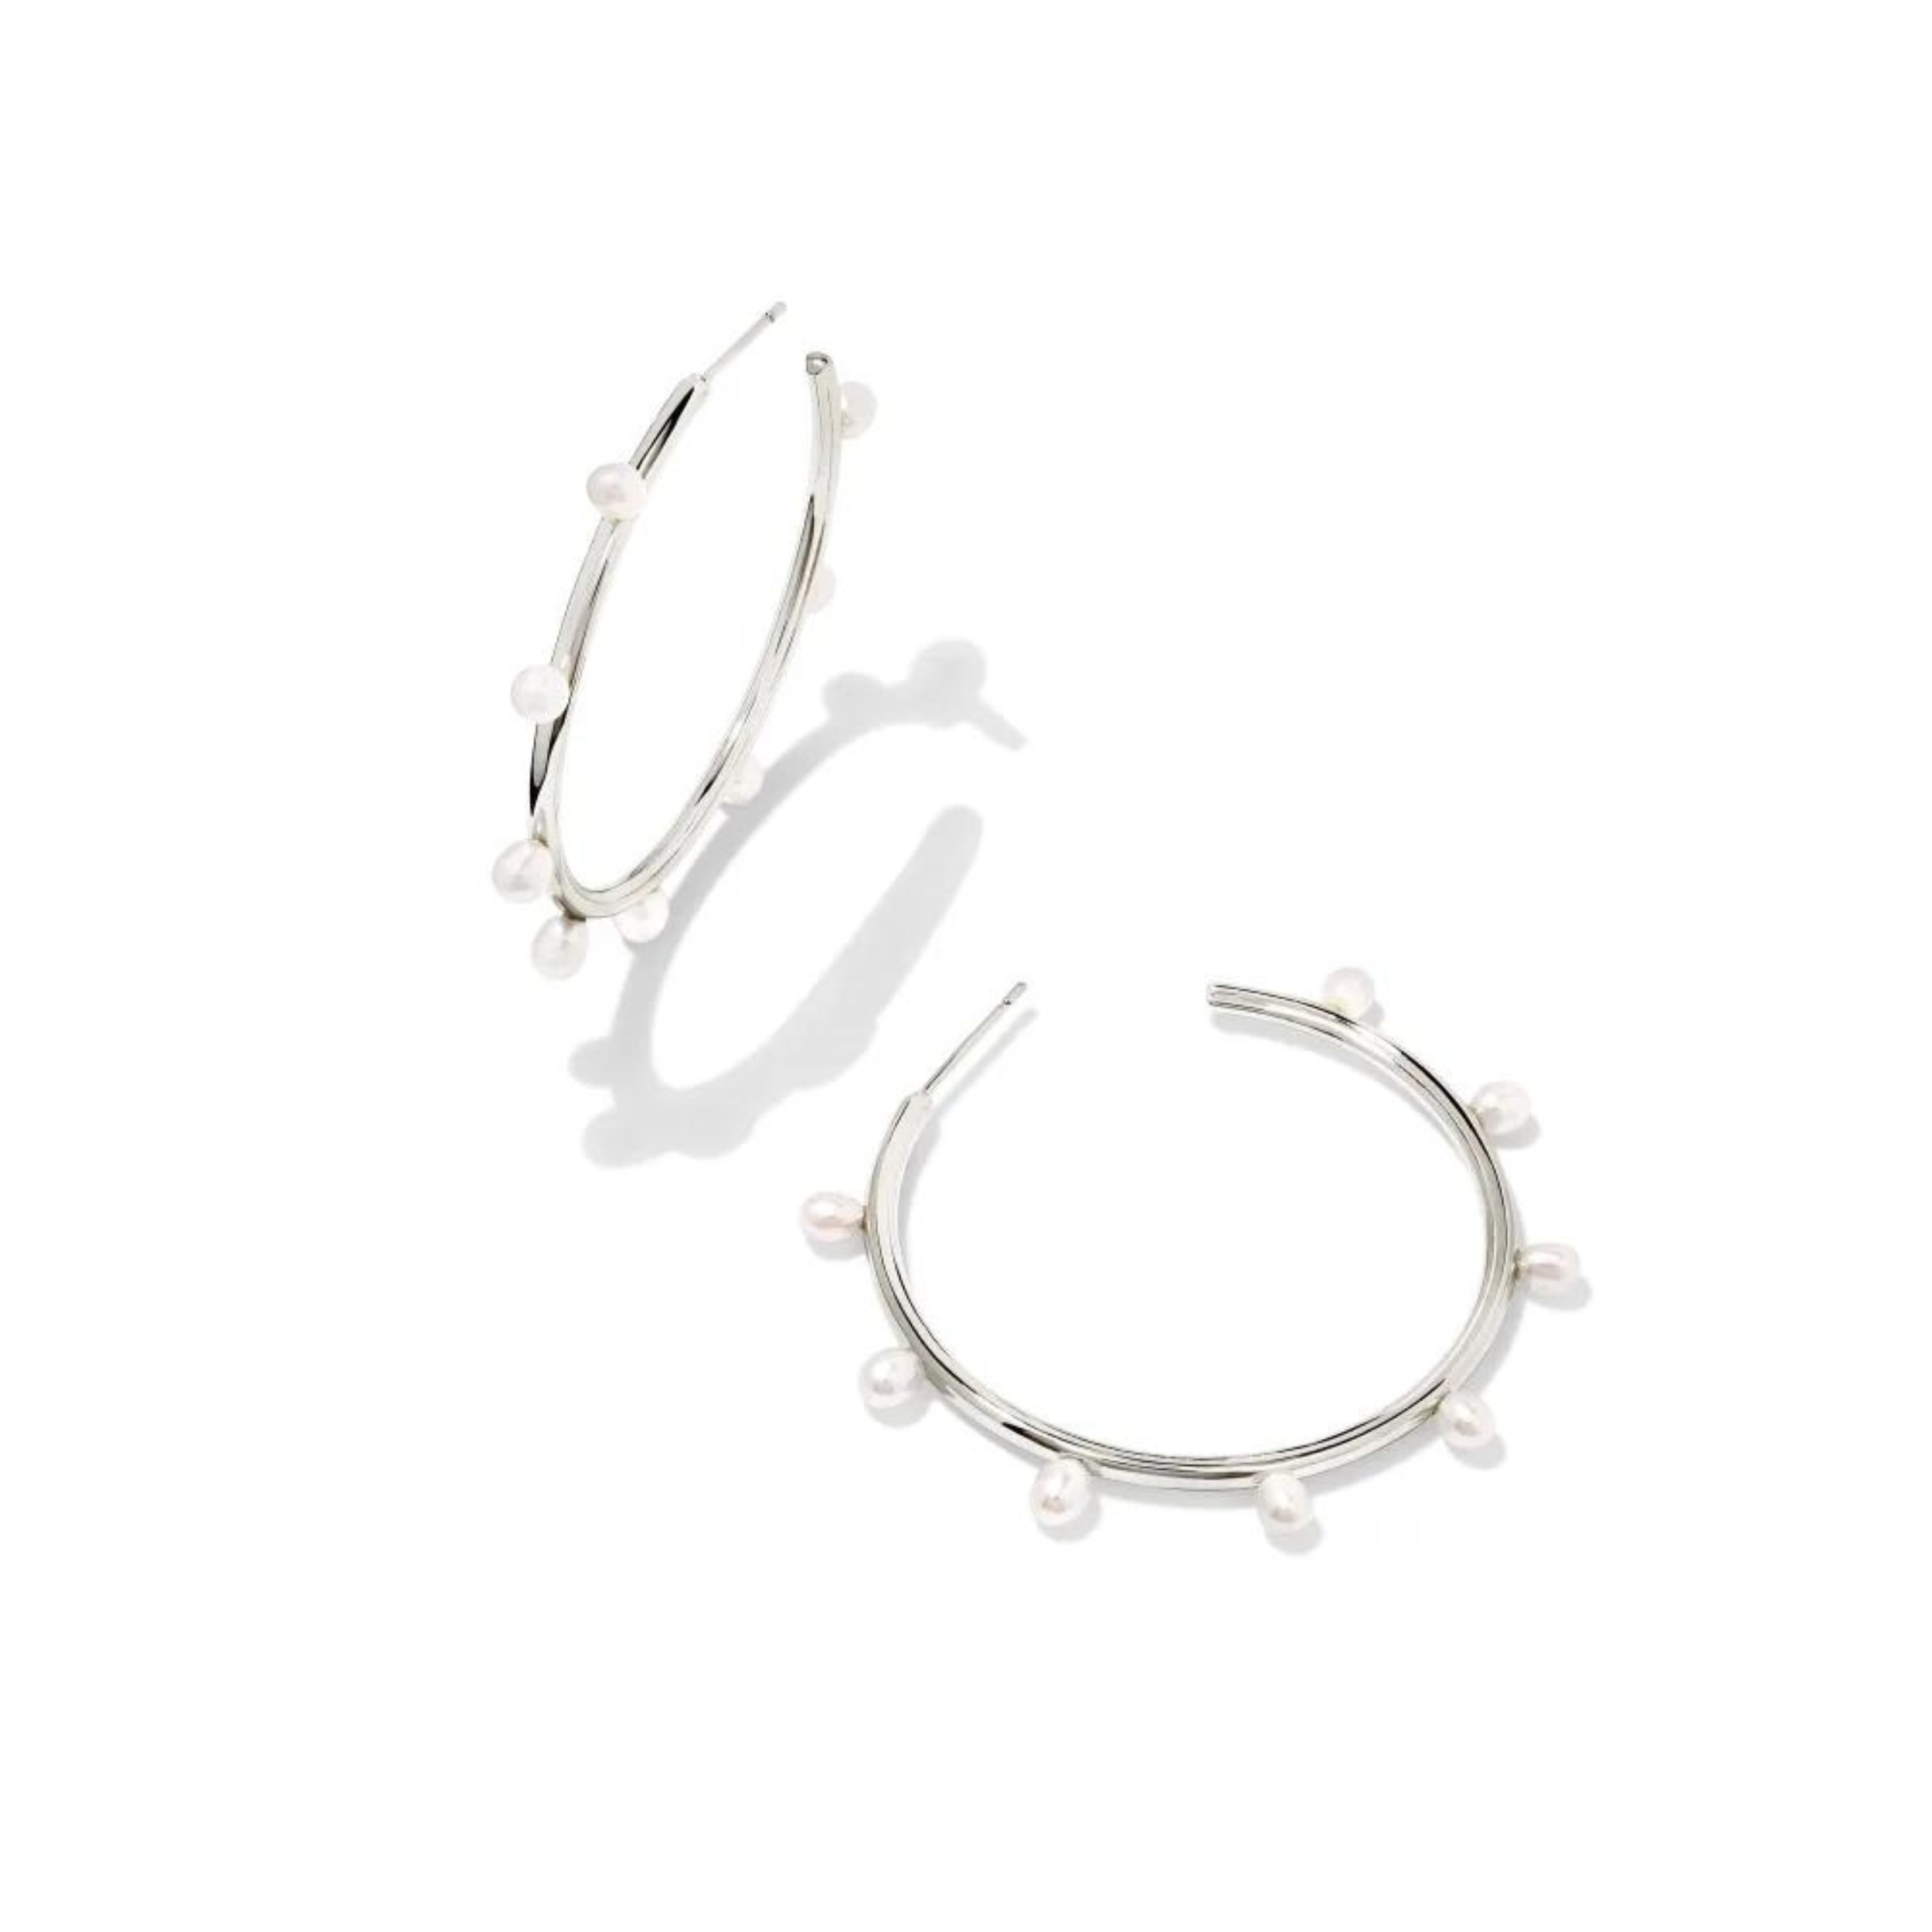 Kendra Scott | Leighton Silver Pearl Hoop Earrings in White Pearl - Giddy Up Glamour Boutique